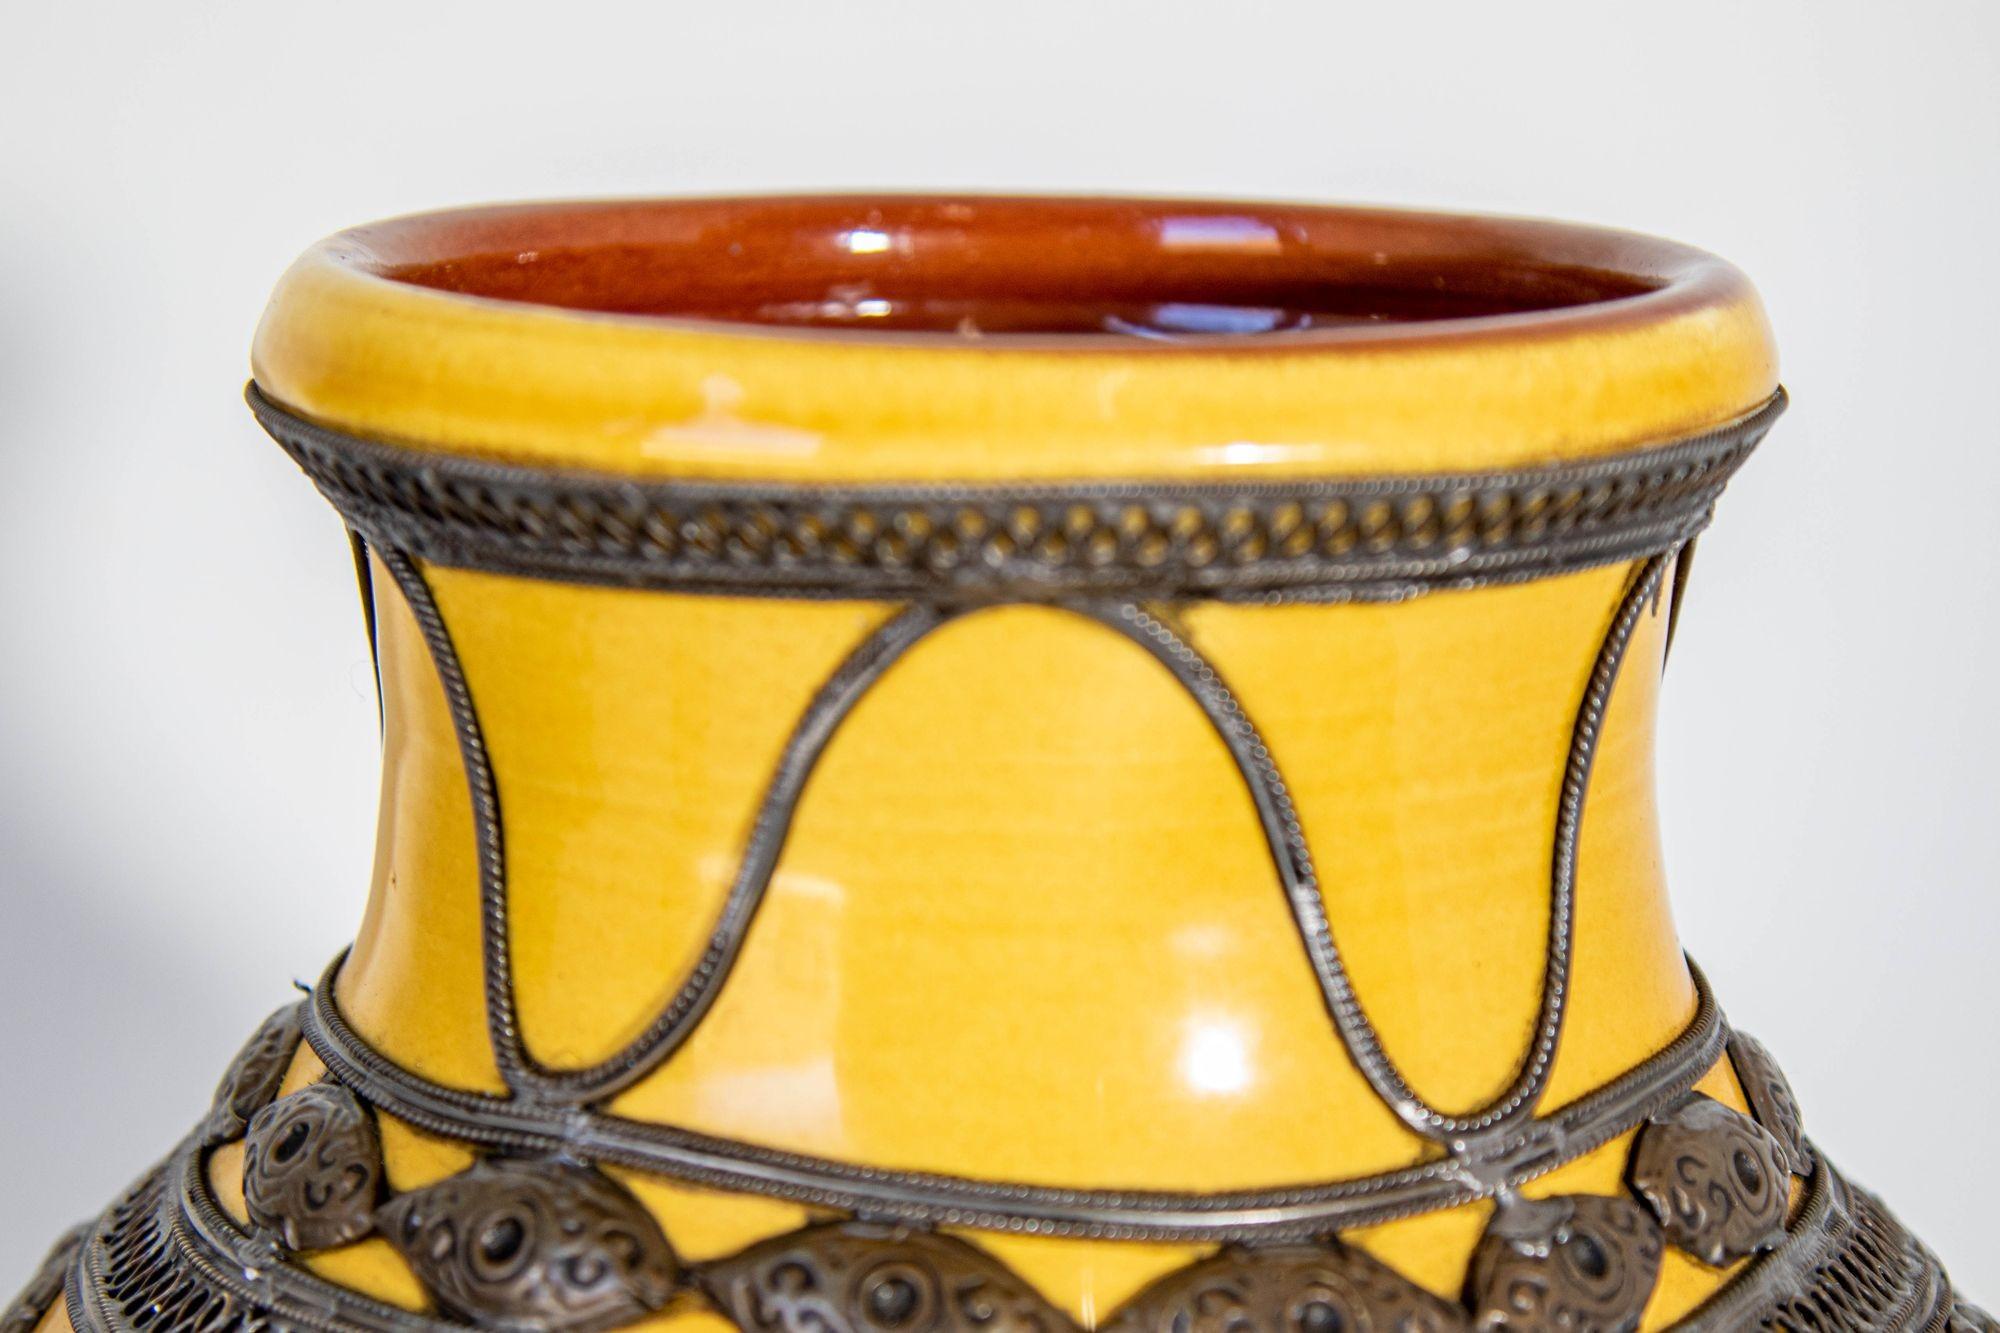 Hand-Crafted Antique Moroccan Ceramic Vase Bright Yellow with Metal Moorish Filigree overlaid For Sale